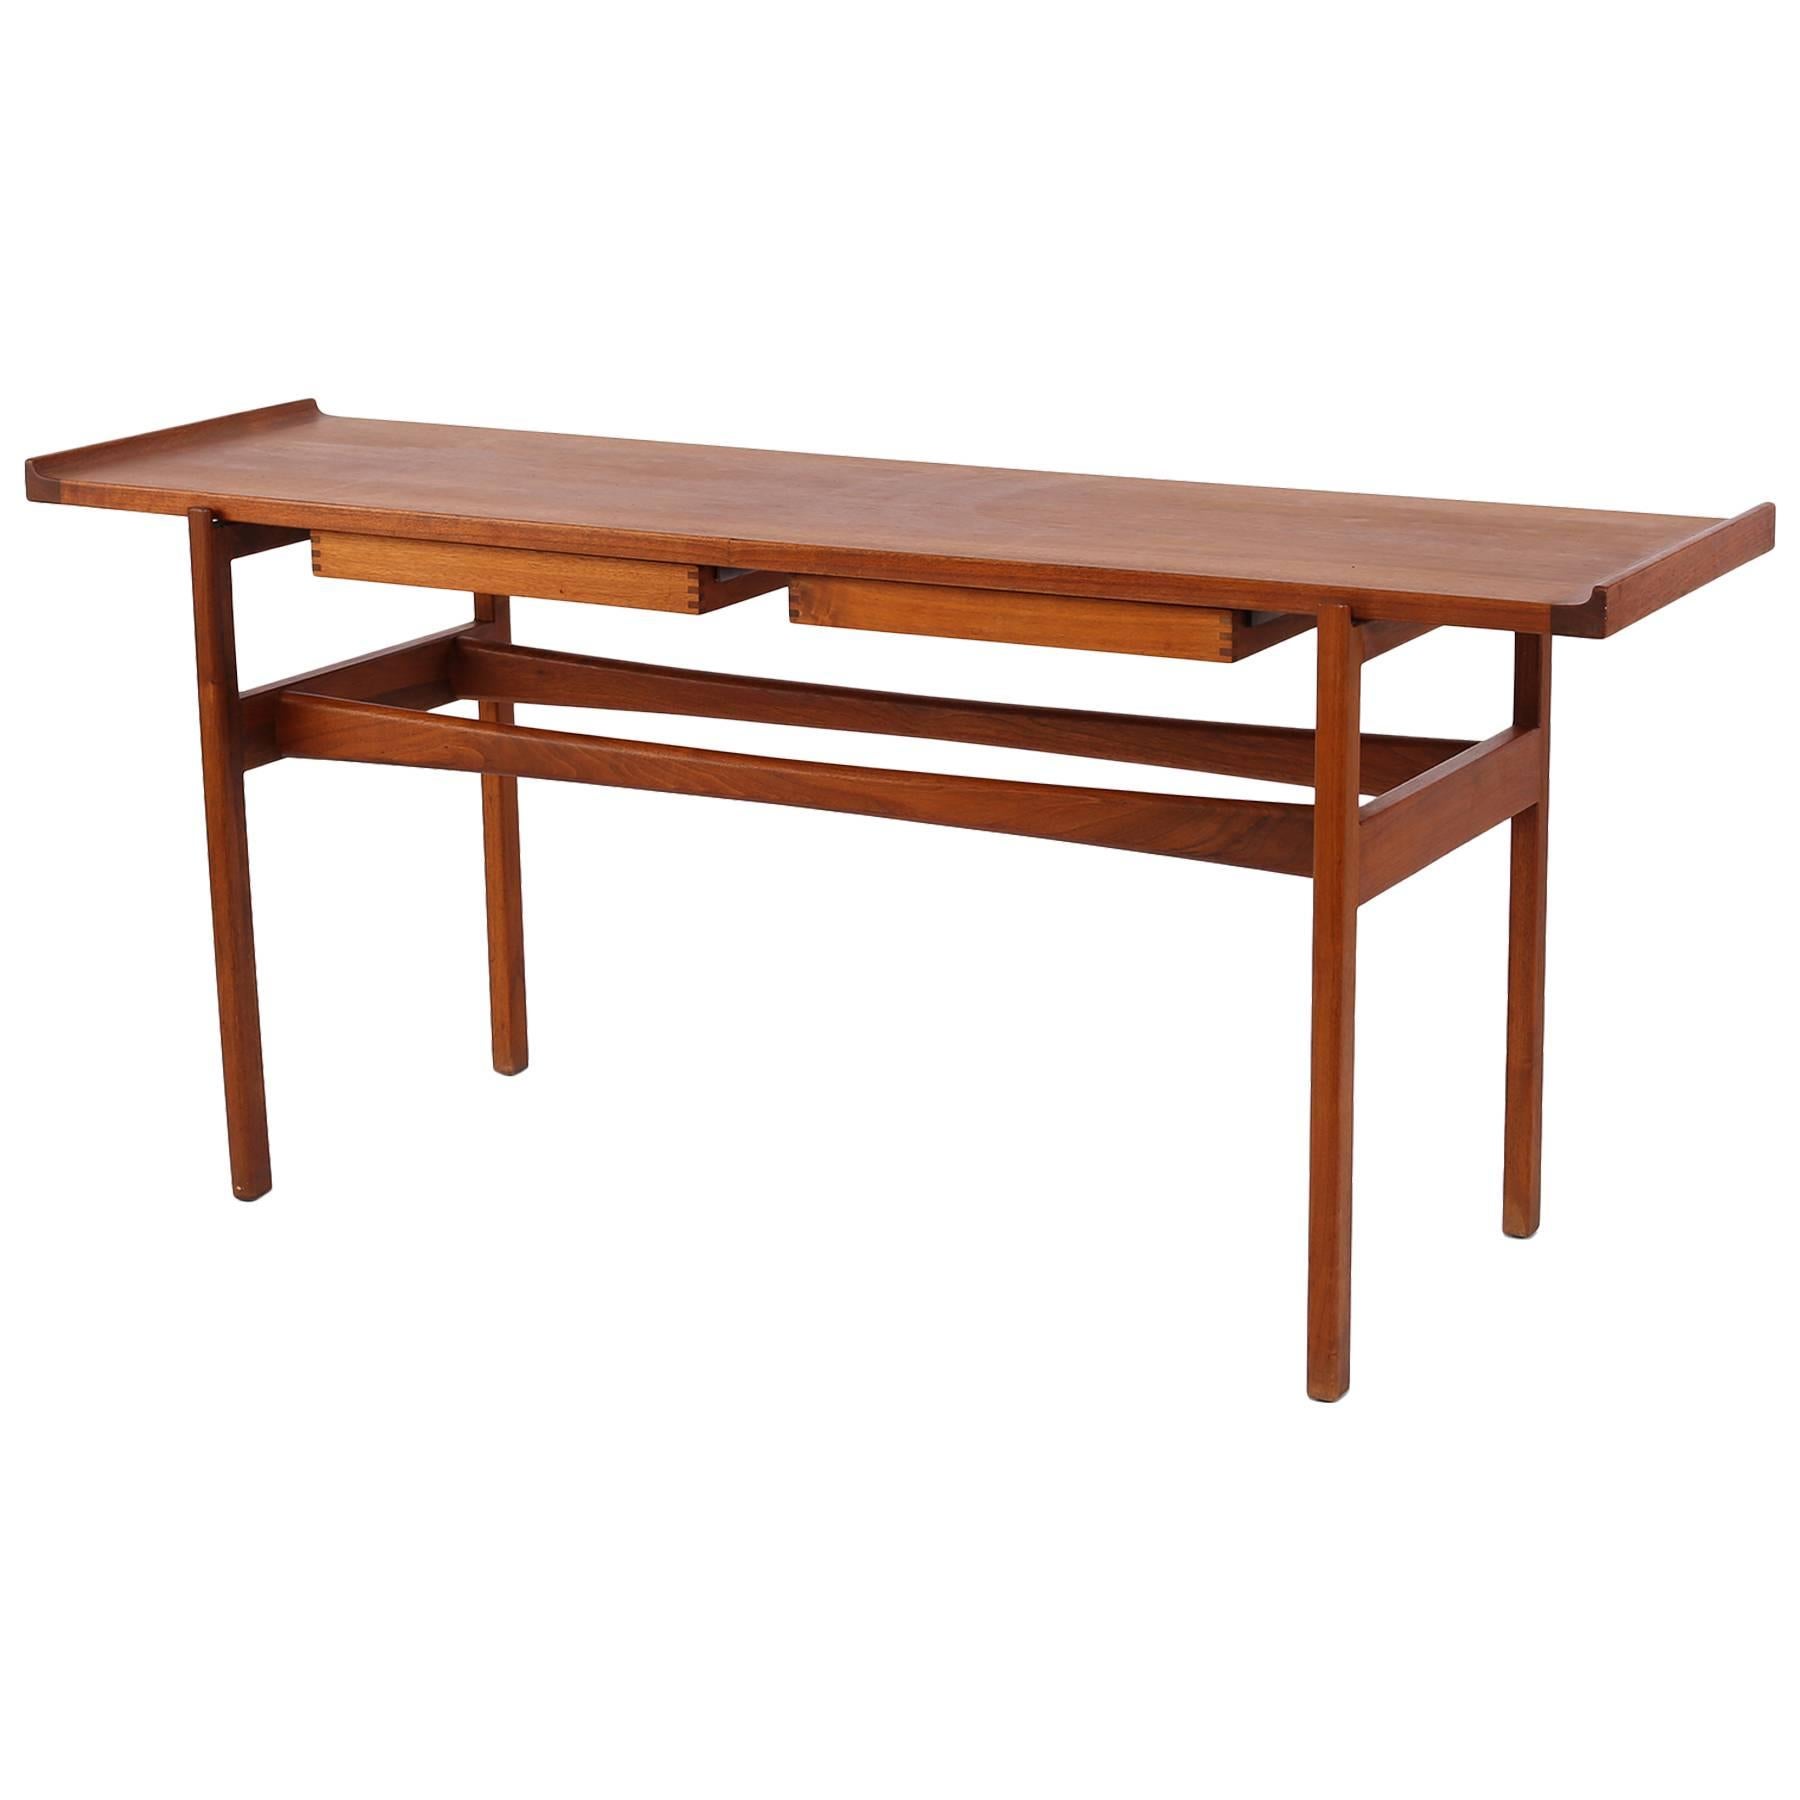 Early Jens Risom Solid Teak Console or Sofa Table